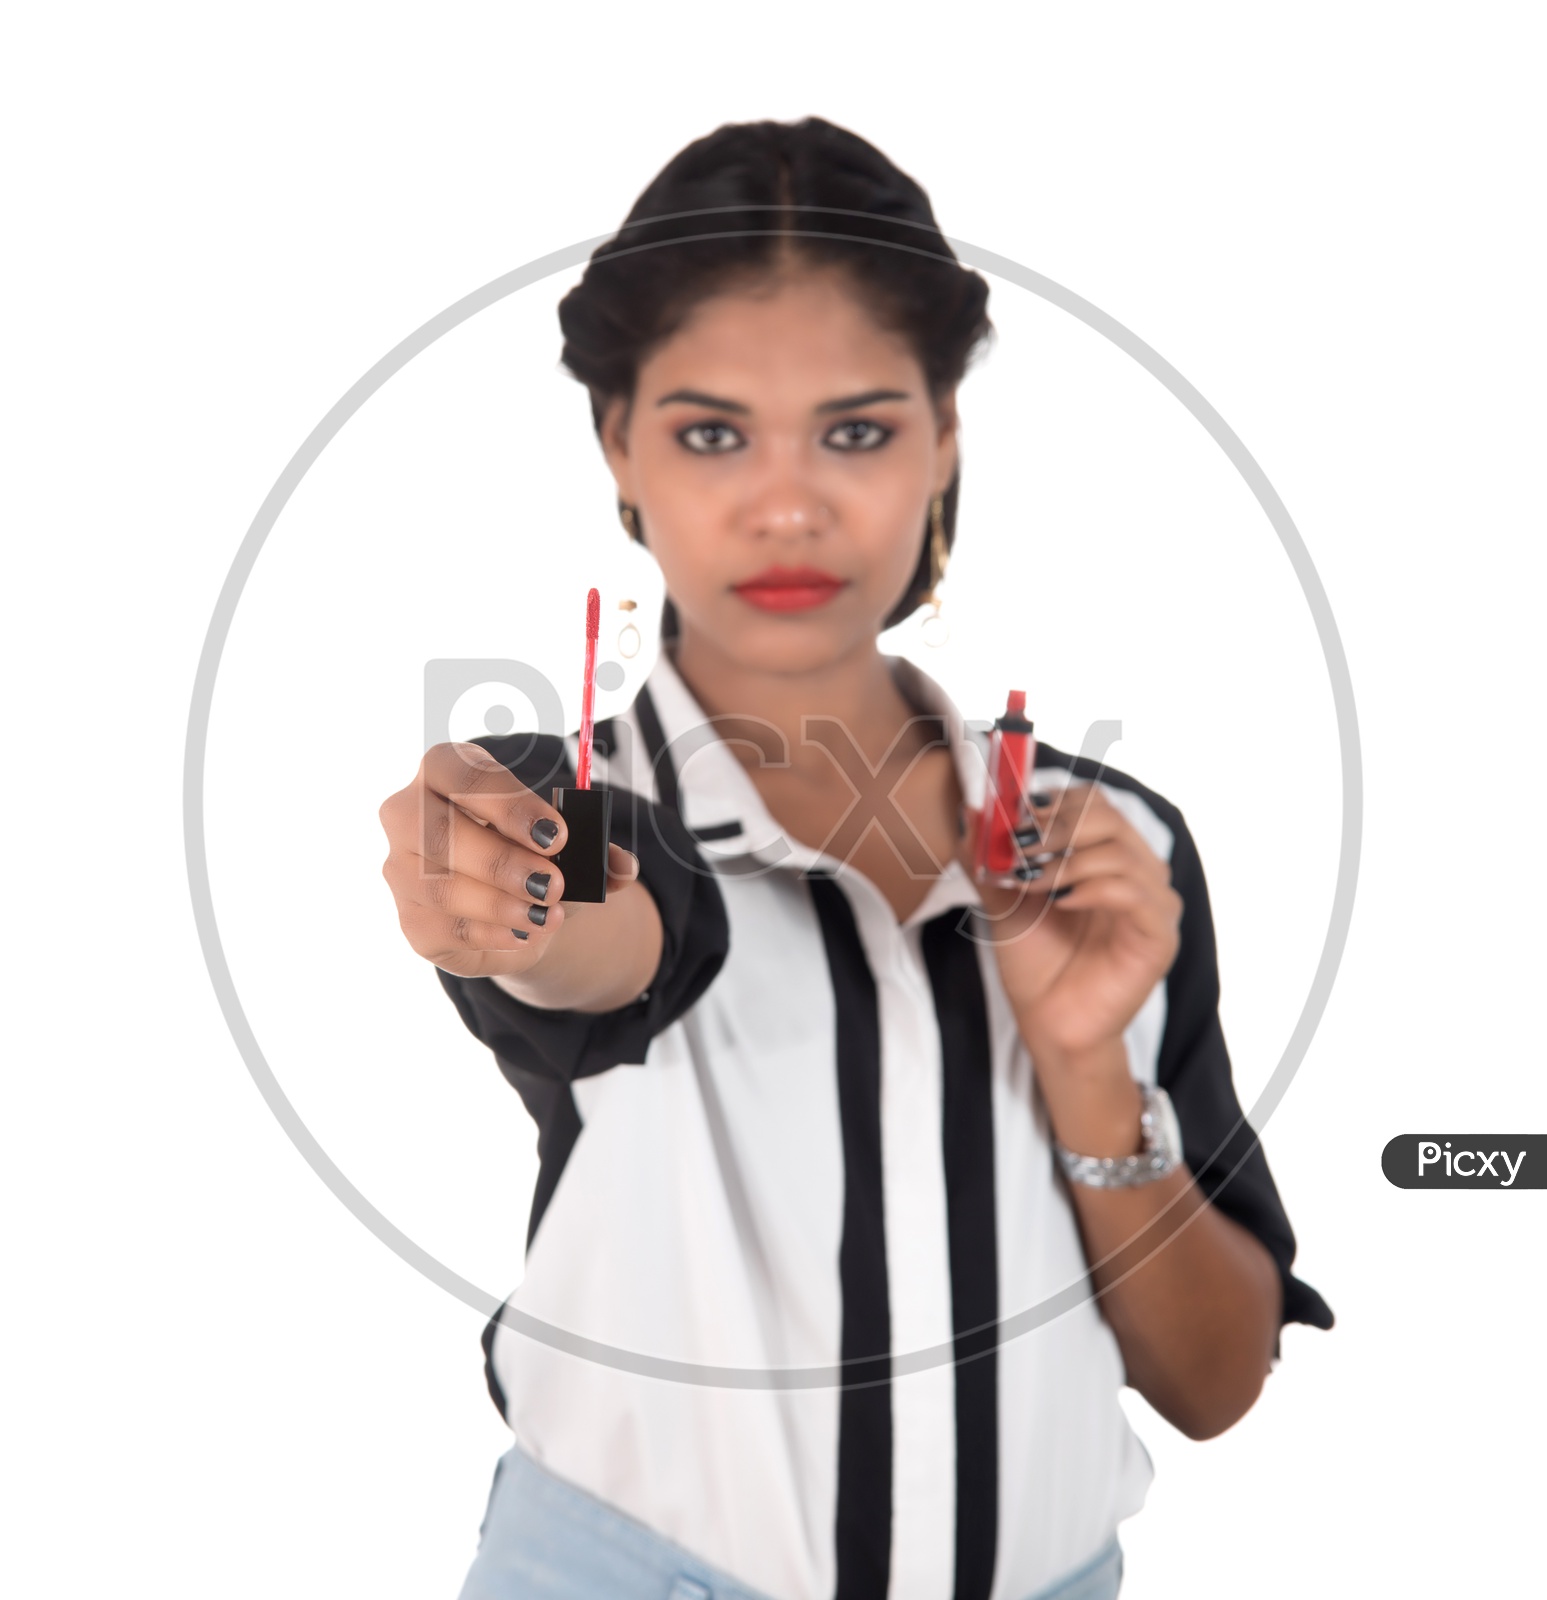 Pretty Young Indian Girl Holding Lipstick In Hand And Posing On an White Background